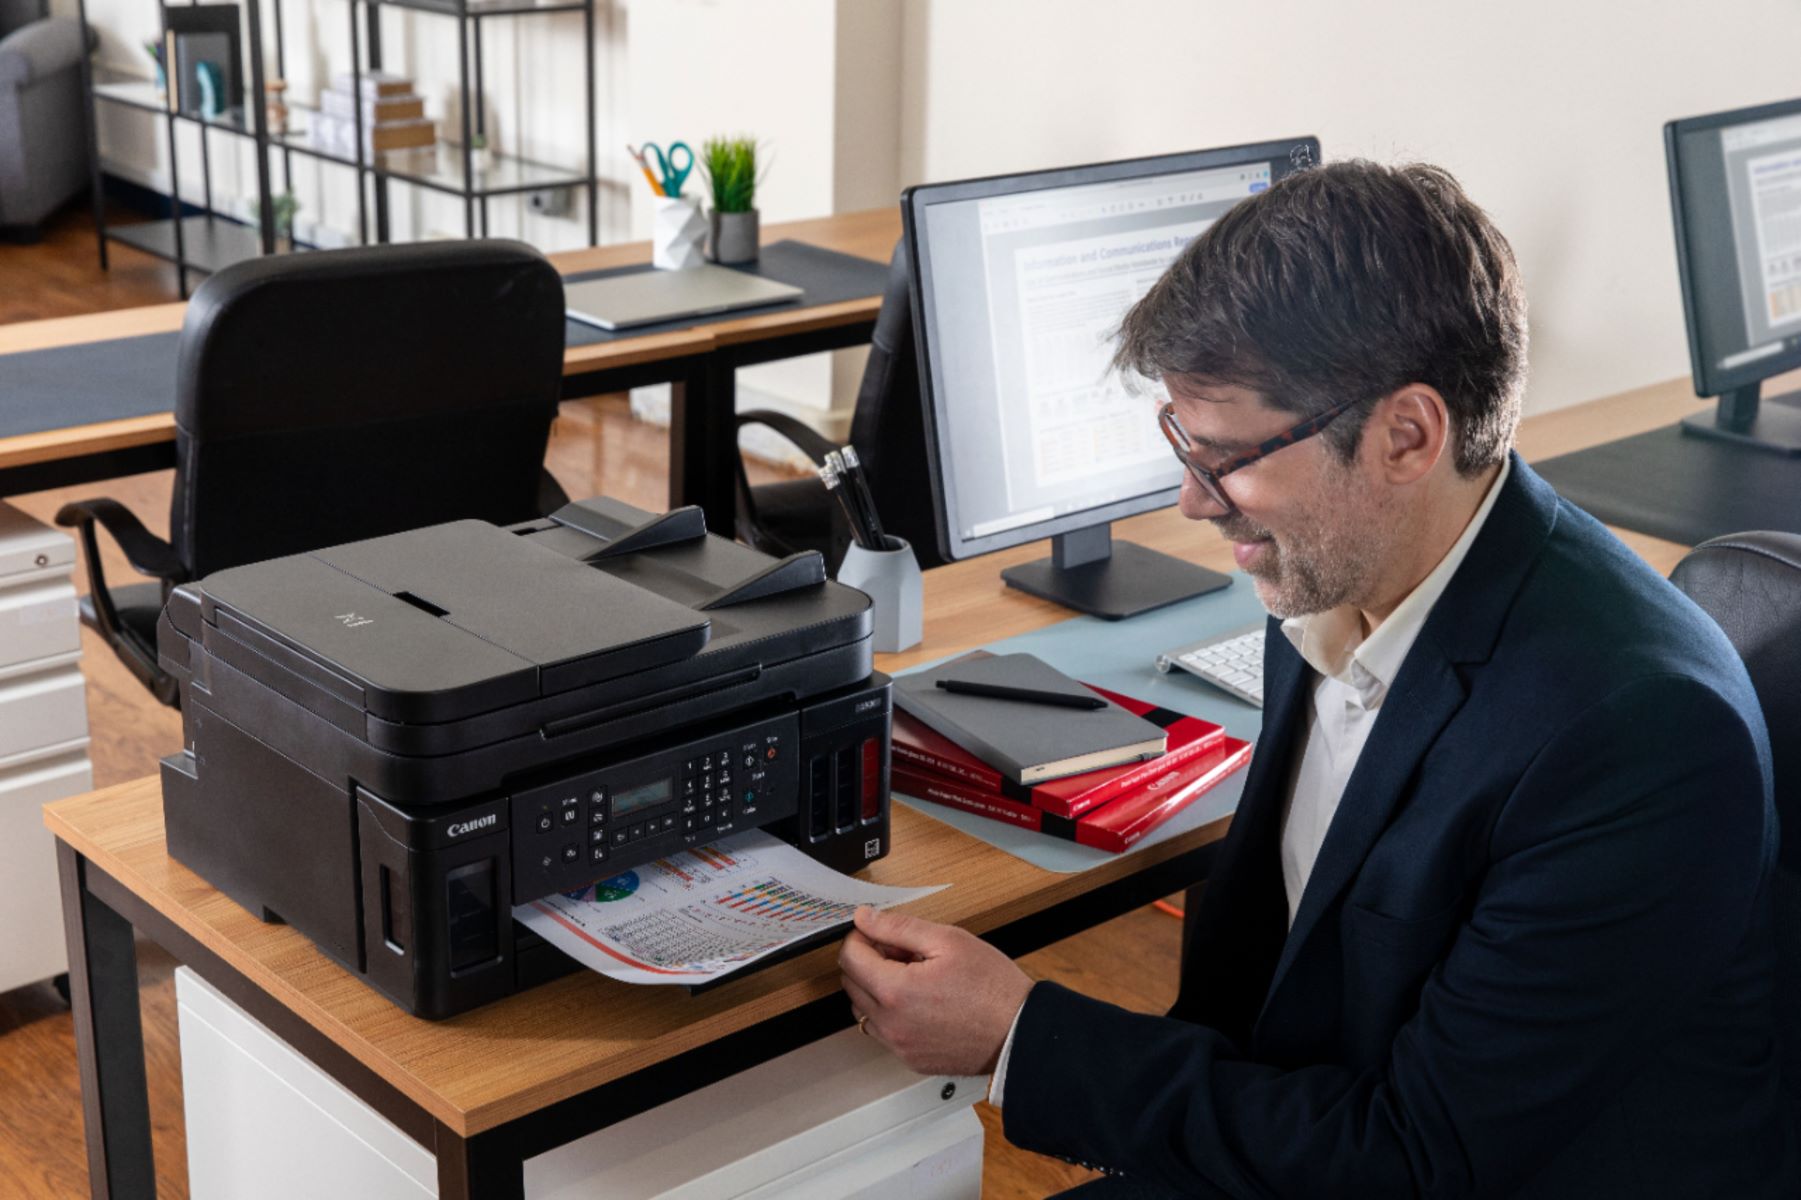 How To Configure Network Printer